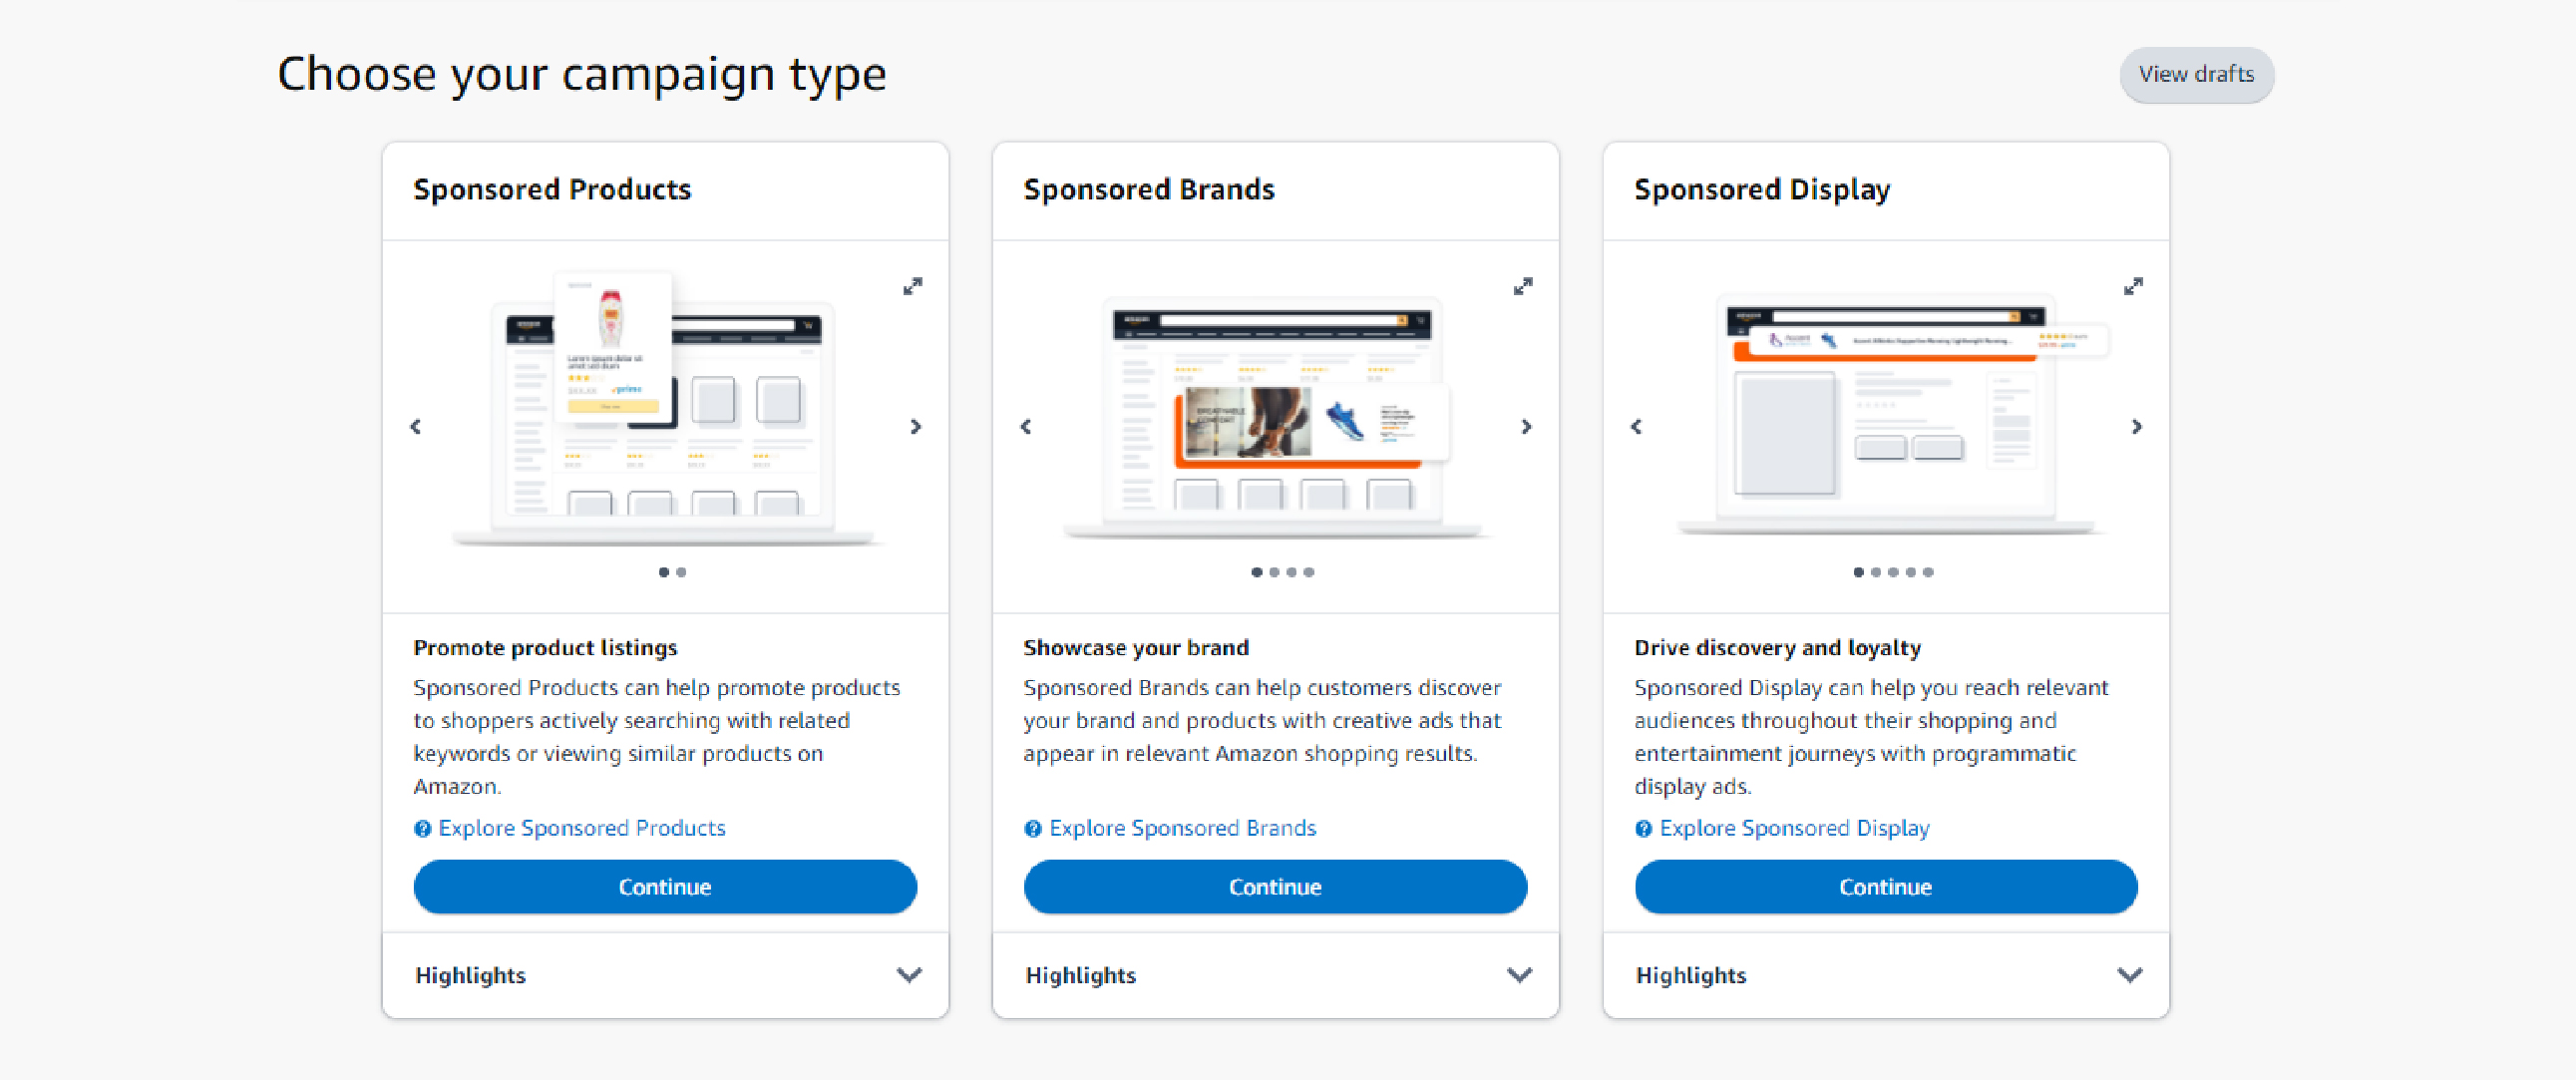 Here Is A Screenshot For Amazon Campaign Types